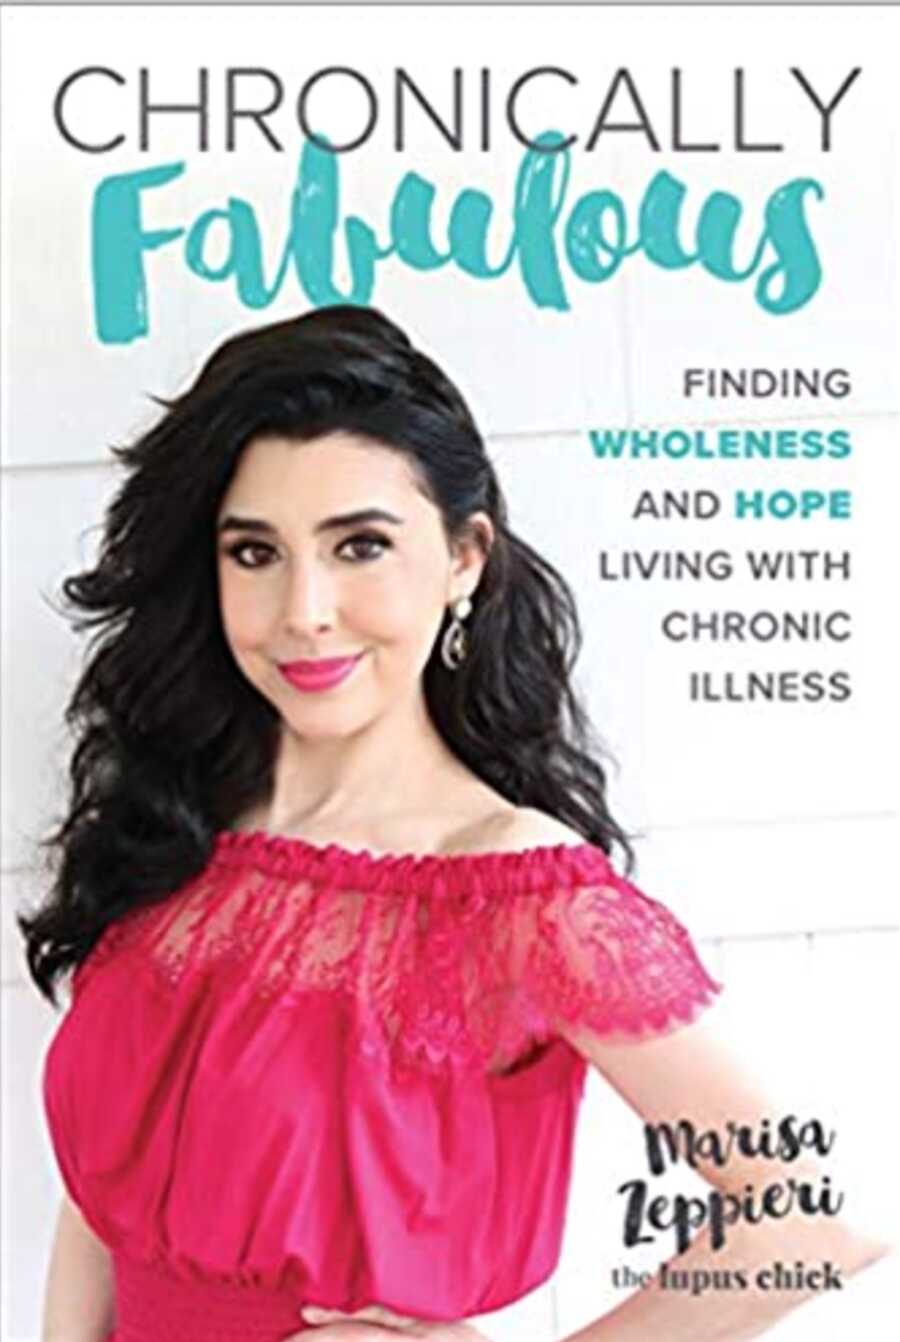 book cover for "Chronically Fabulous"